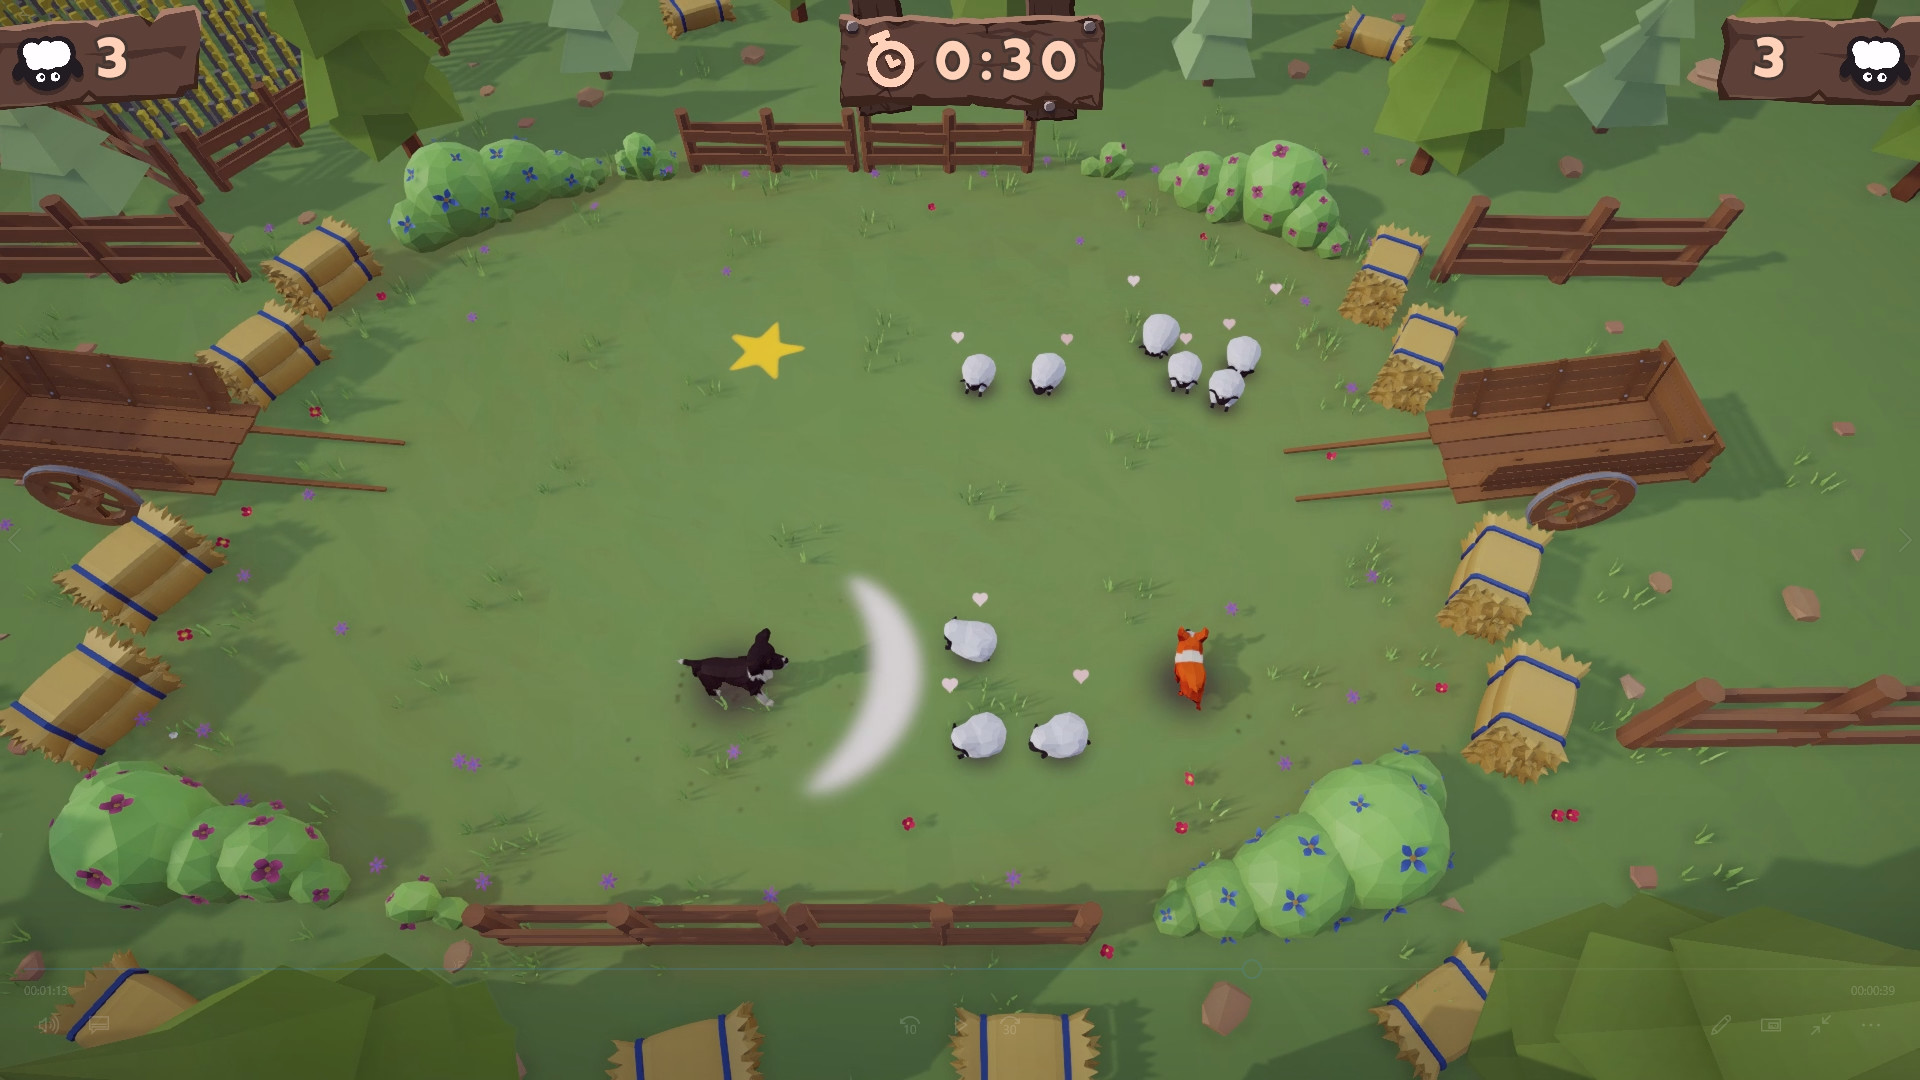 Disobedient Sheep Free Download